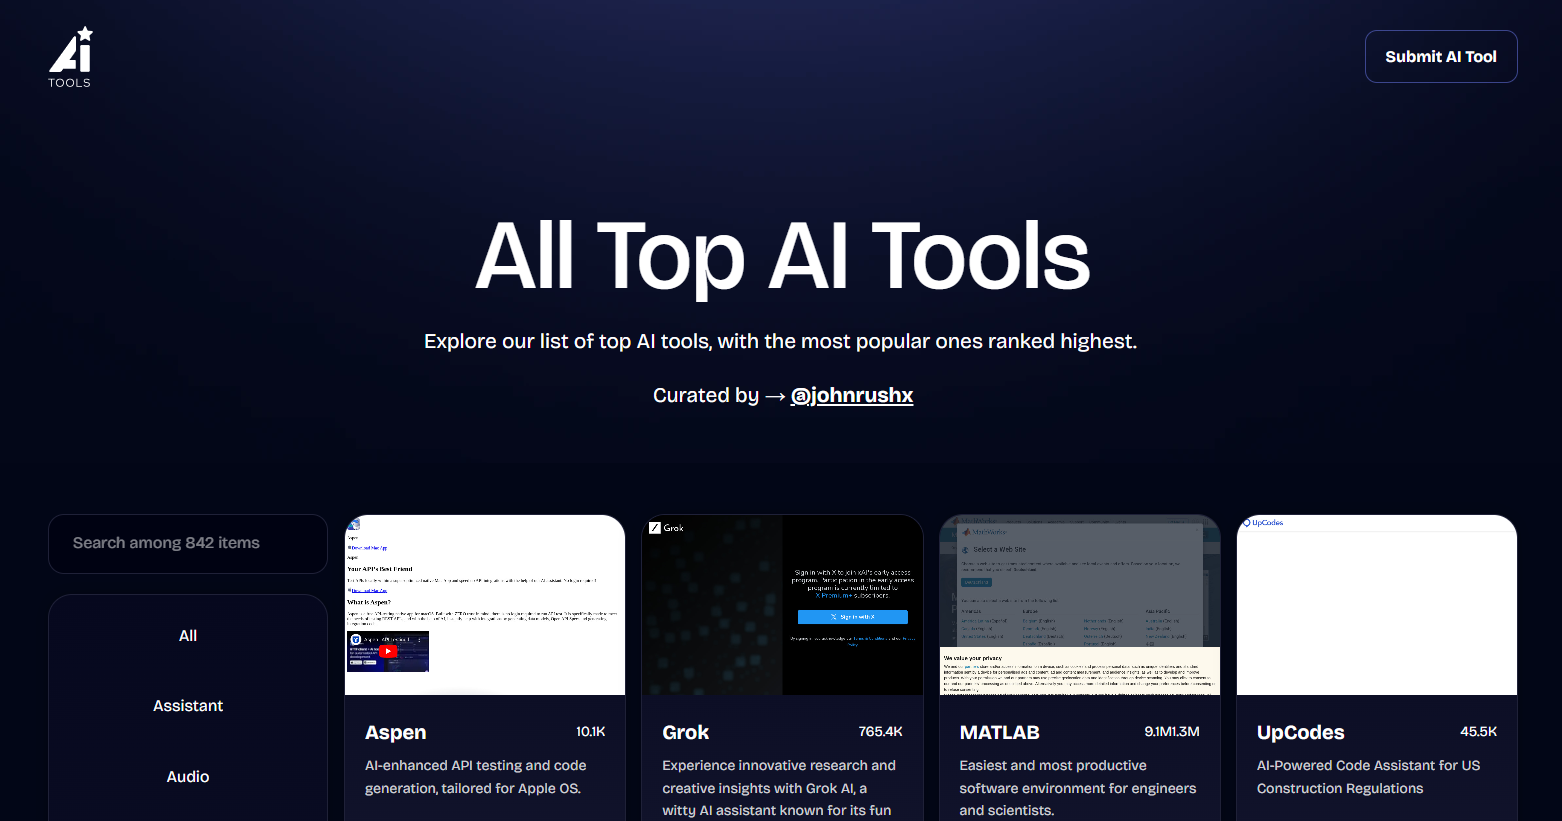 All Top AI Tools cover